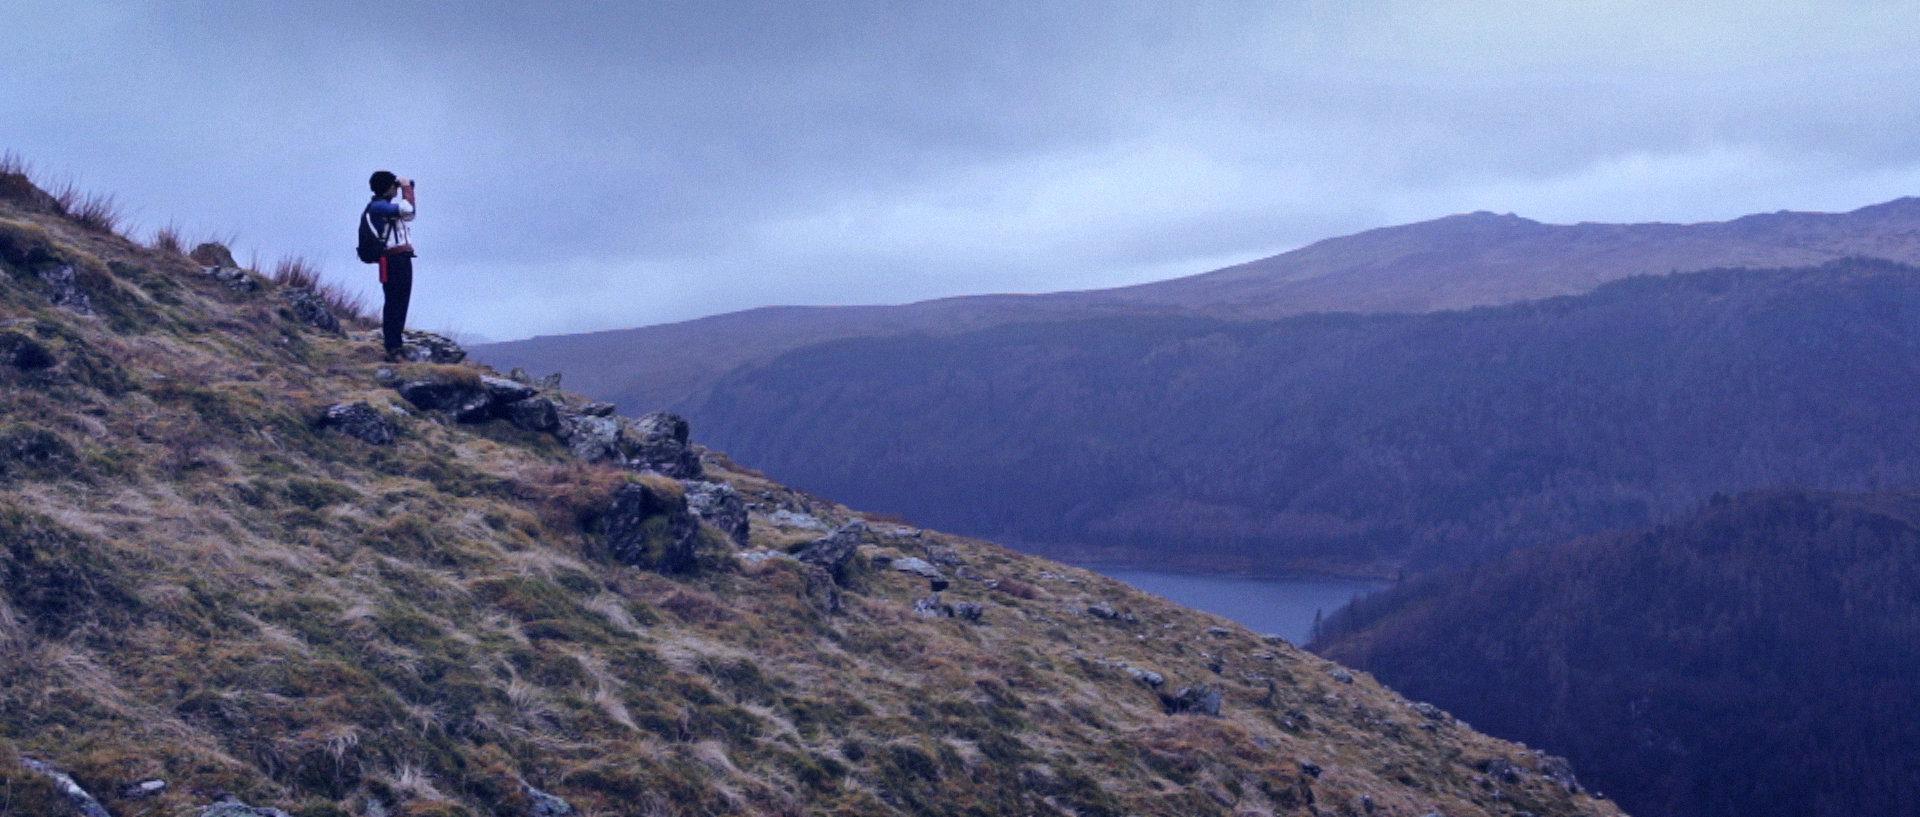 Frame from The End of William.